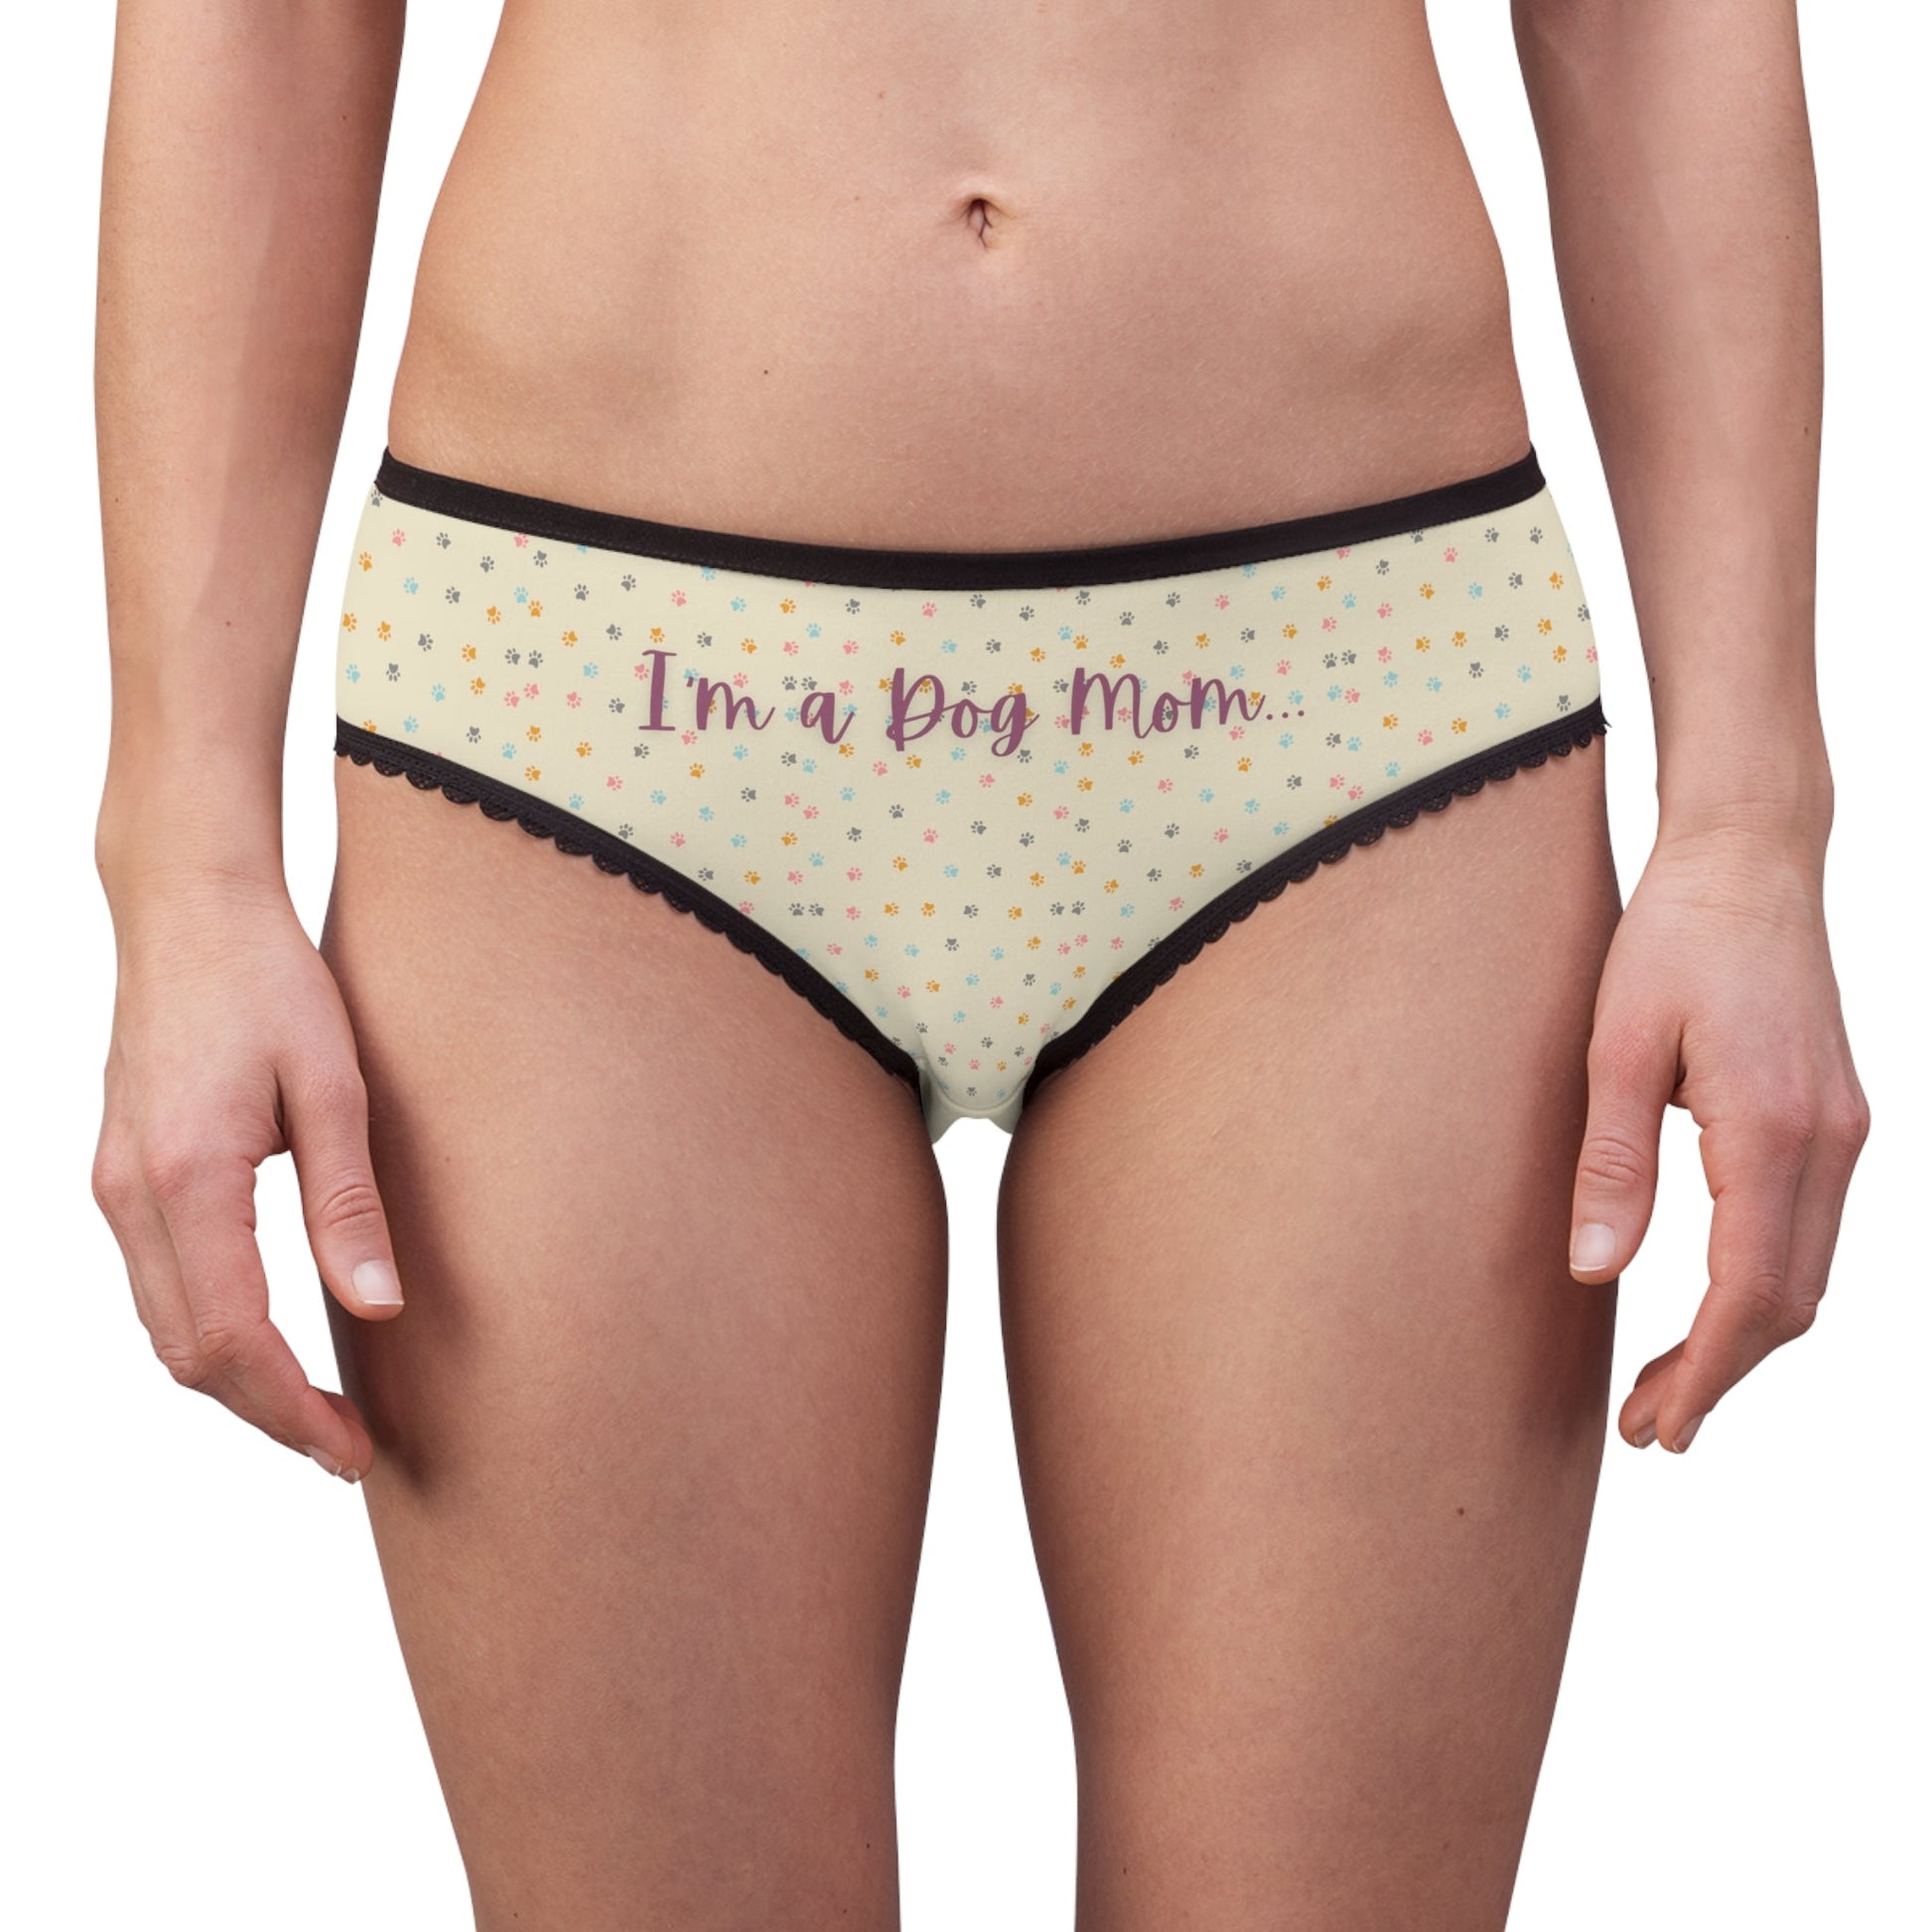 Doing Dog Mom Things Undies - All Over Prints